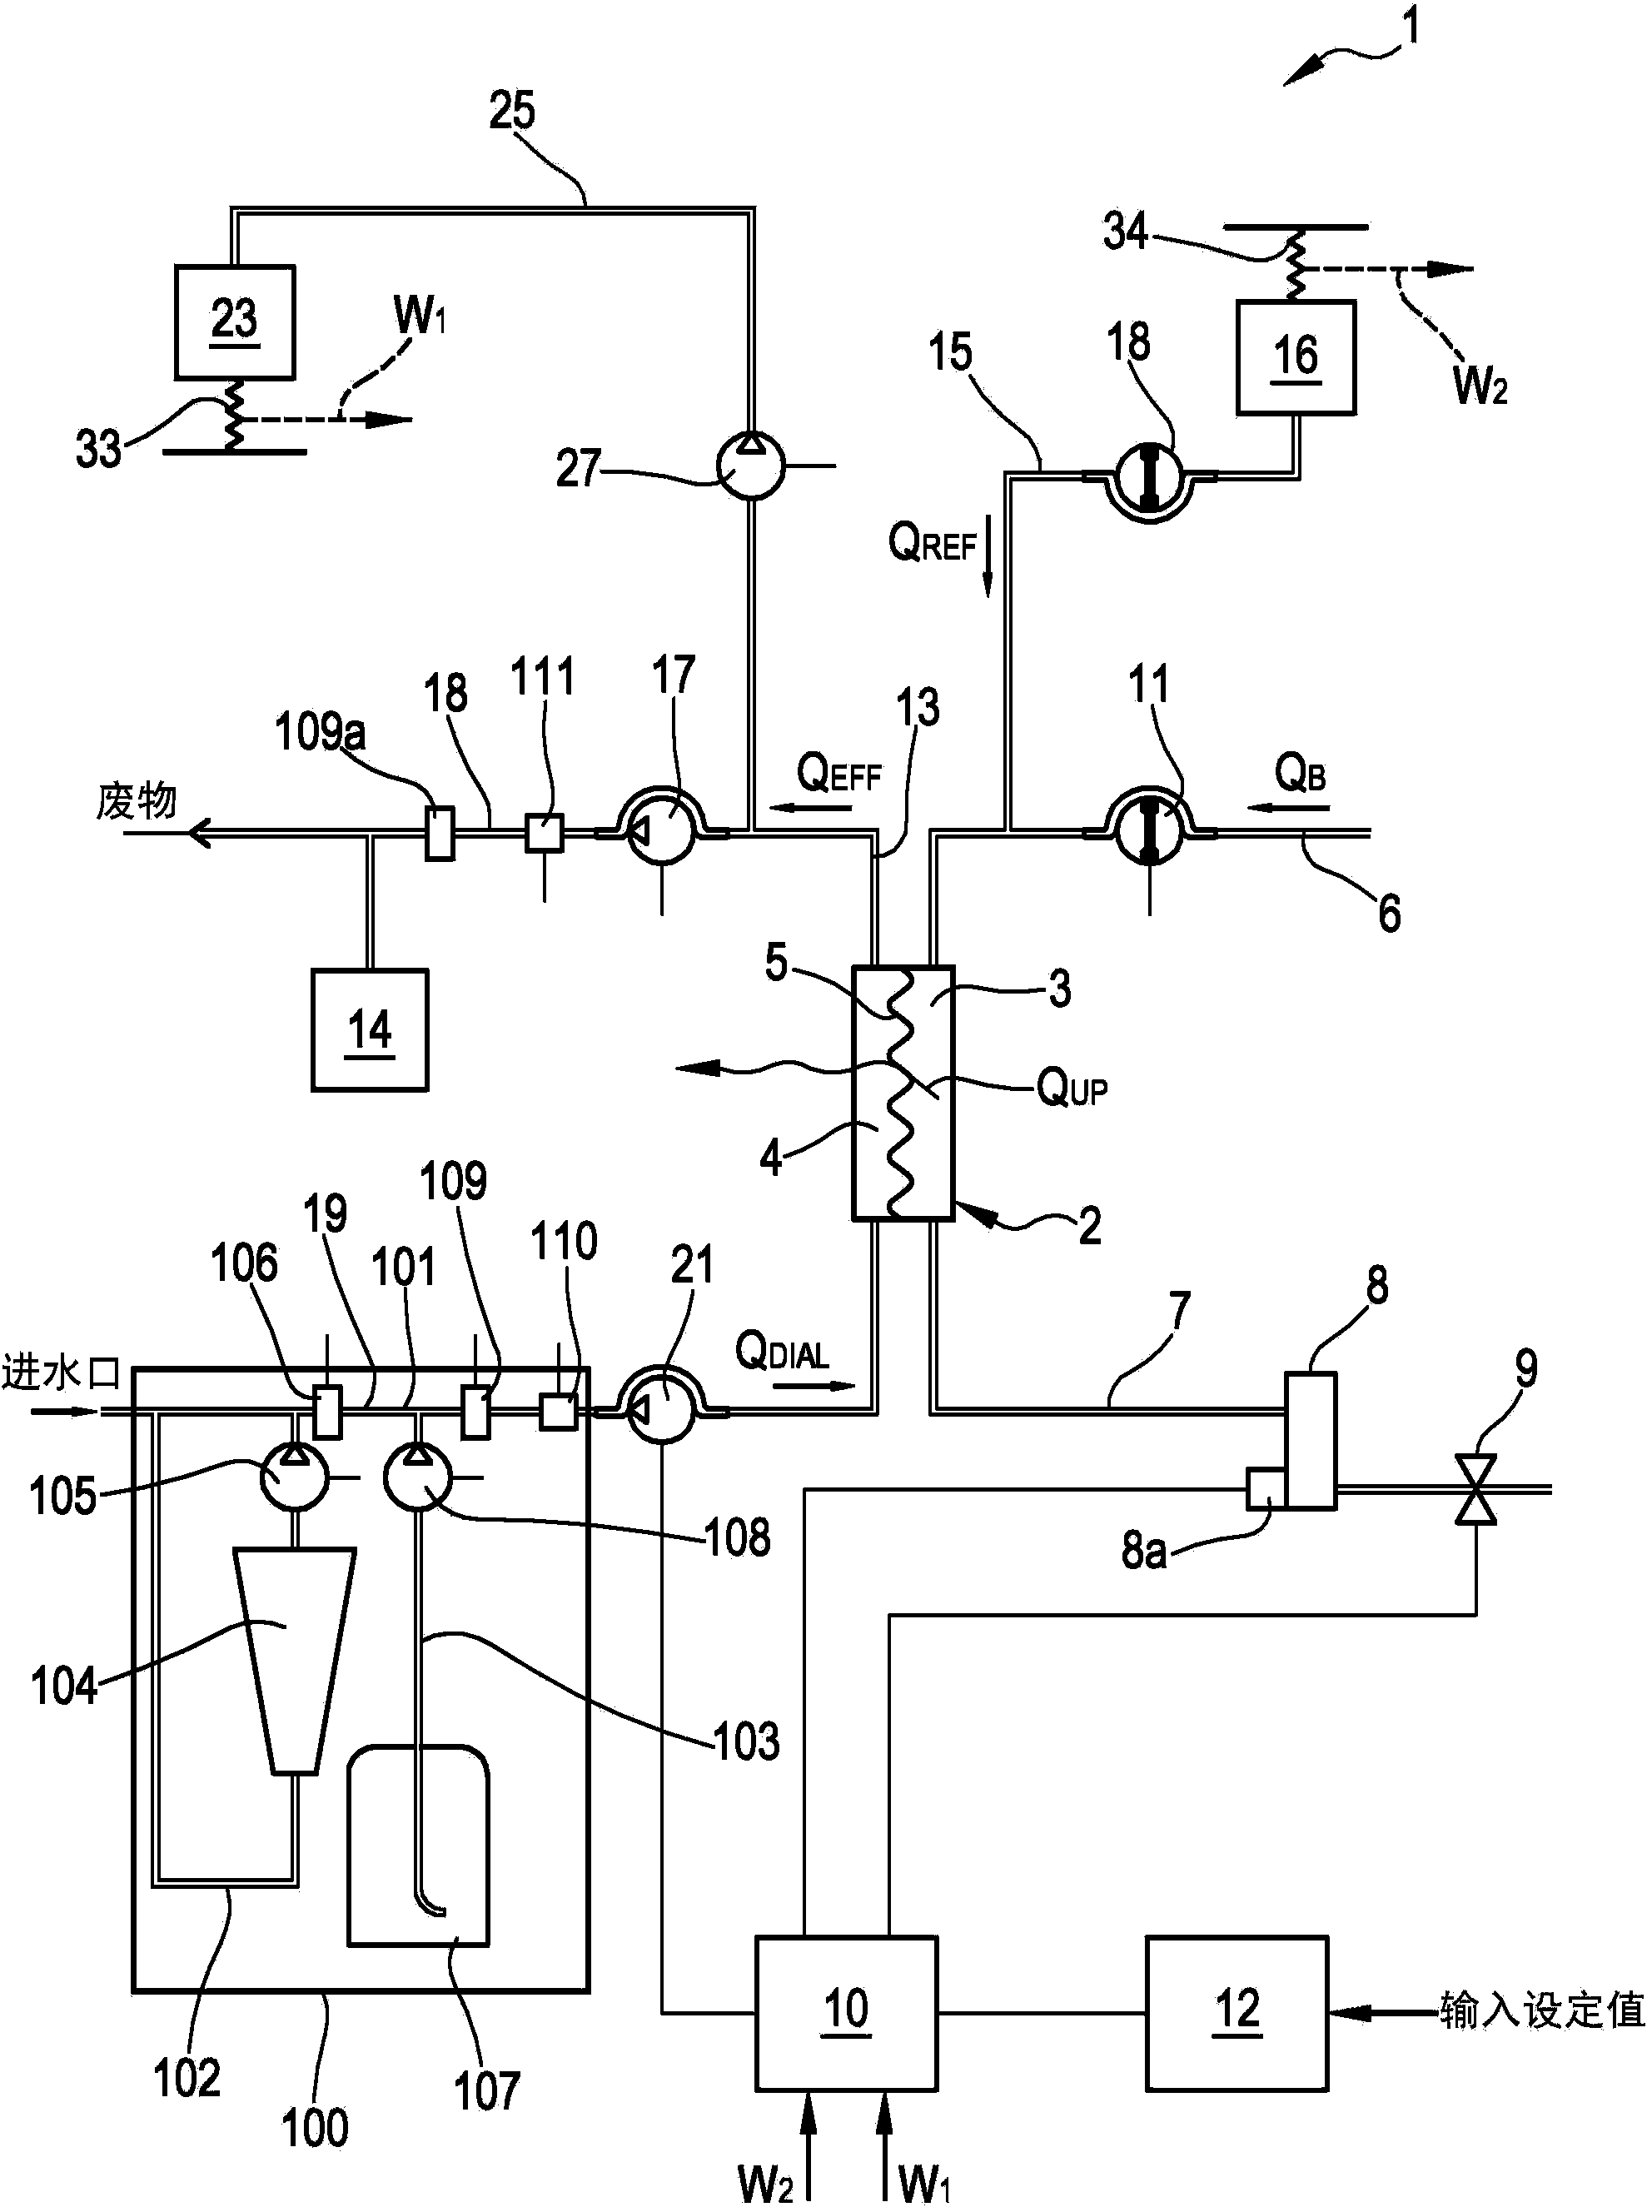 Apparatus for determining a parameter indicative of the progress of an extracorporeal blood treatment